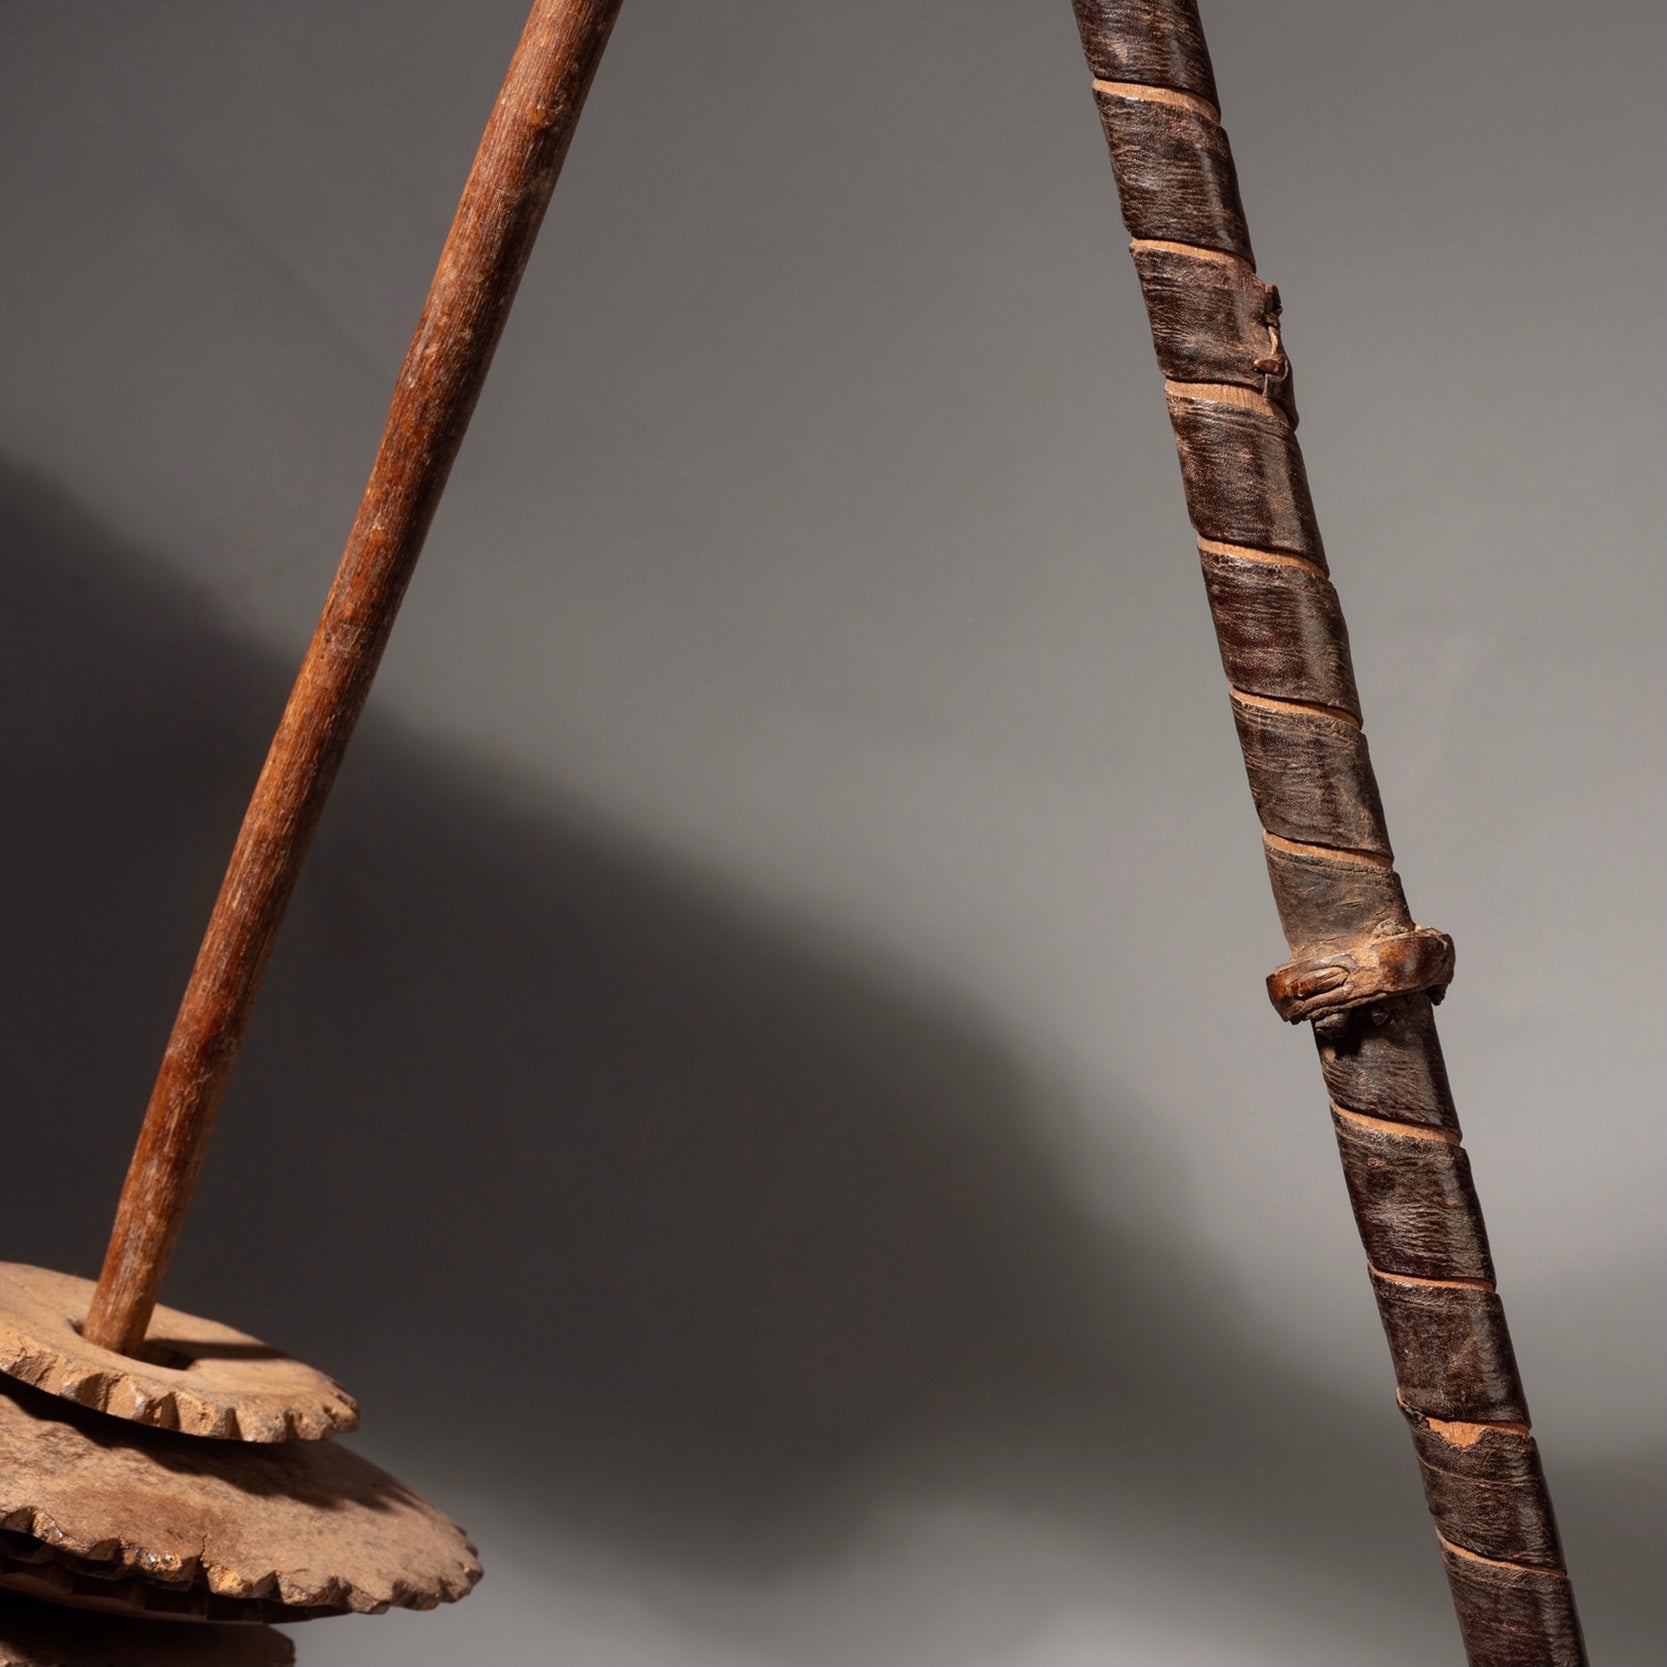 AN ARTISTIC SENUFO MUSICAL INSTRUMENT FROM IVORY COAST ( No 1098)